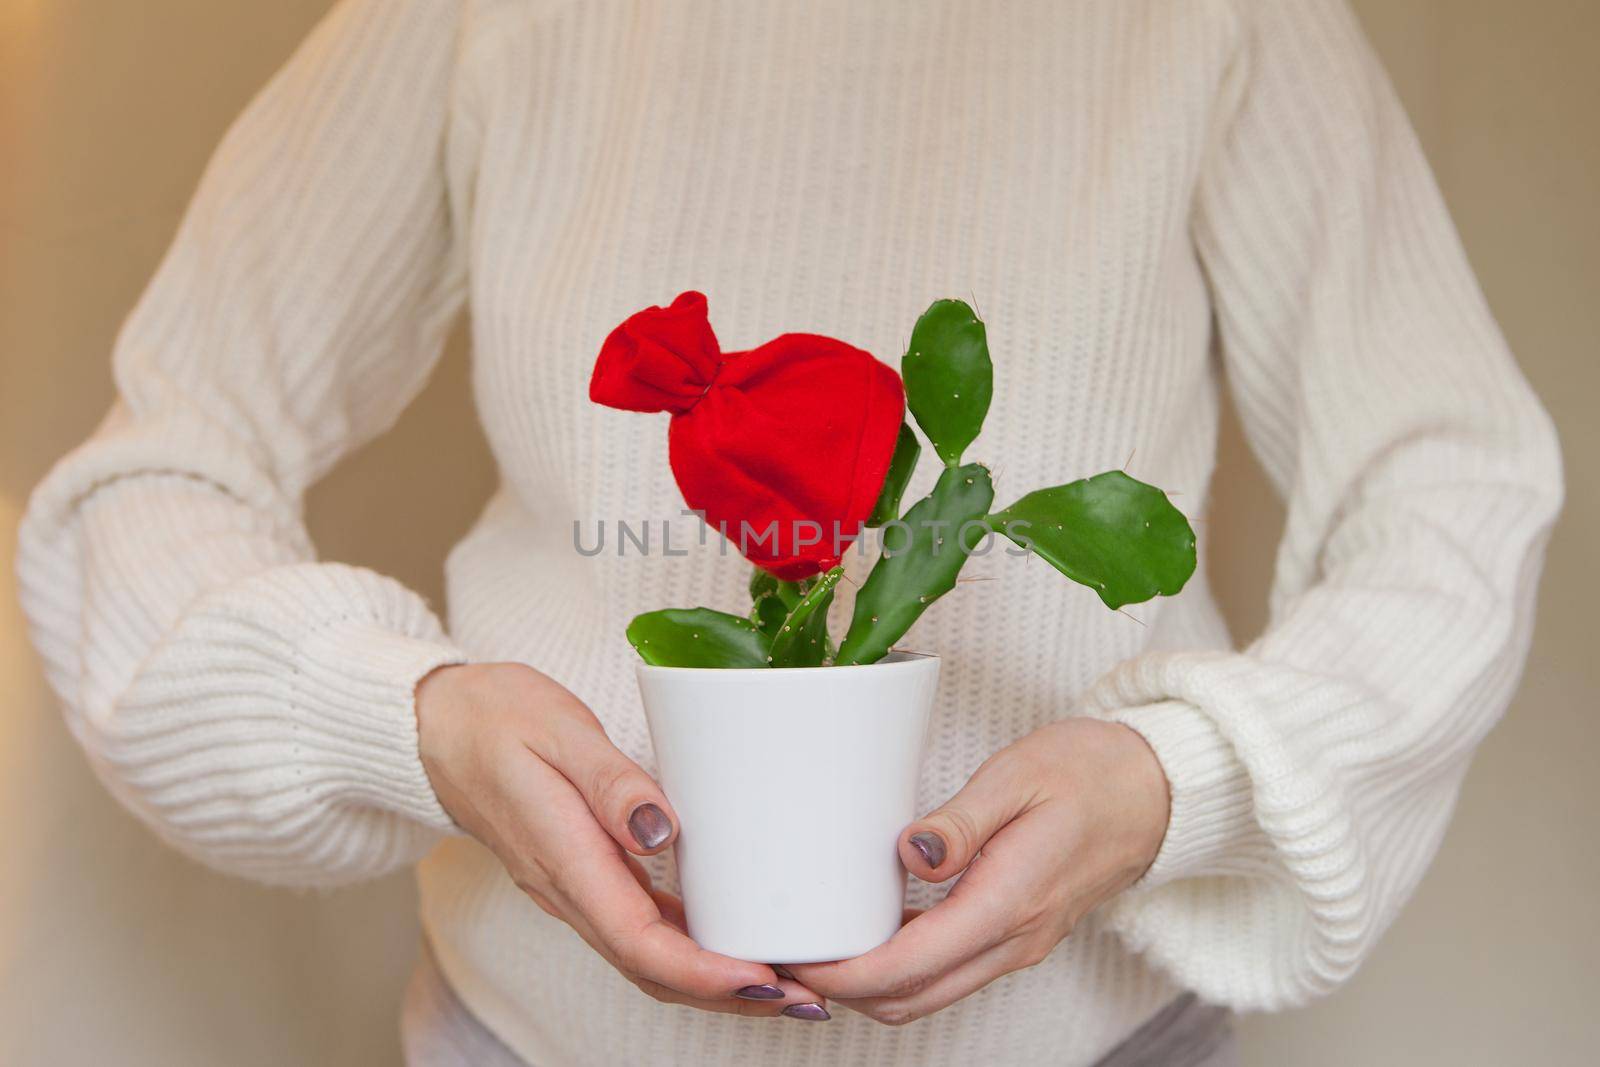 woman holding in her hands green cactus with red Santa hat in white pot. Christmas gift or new year concept